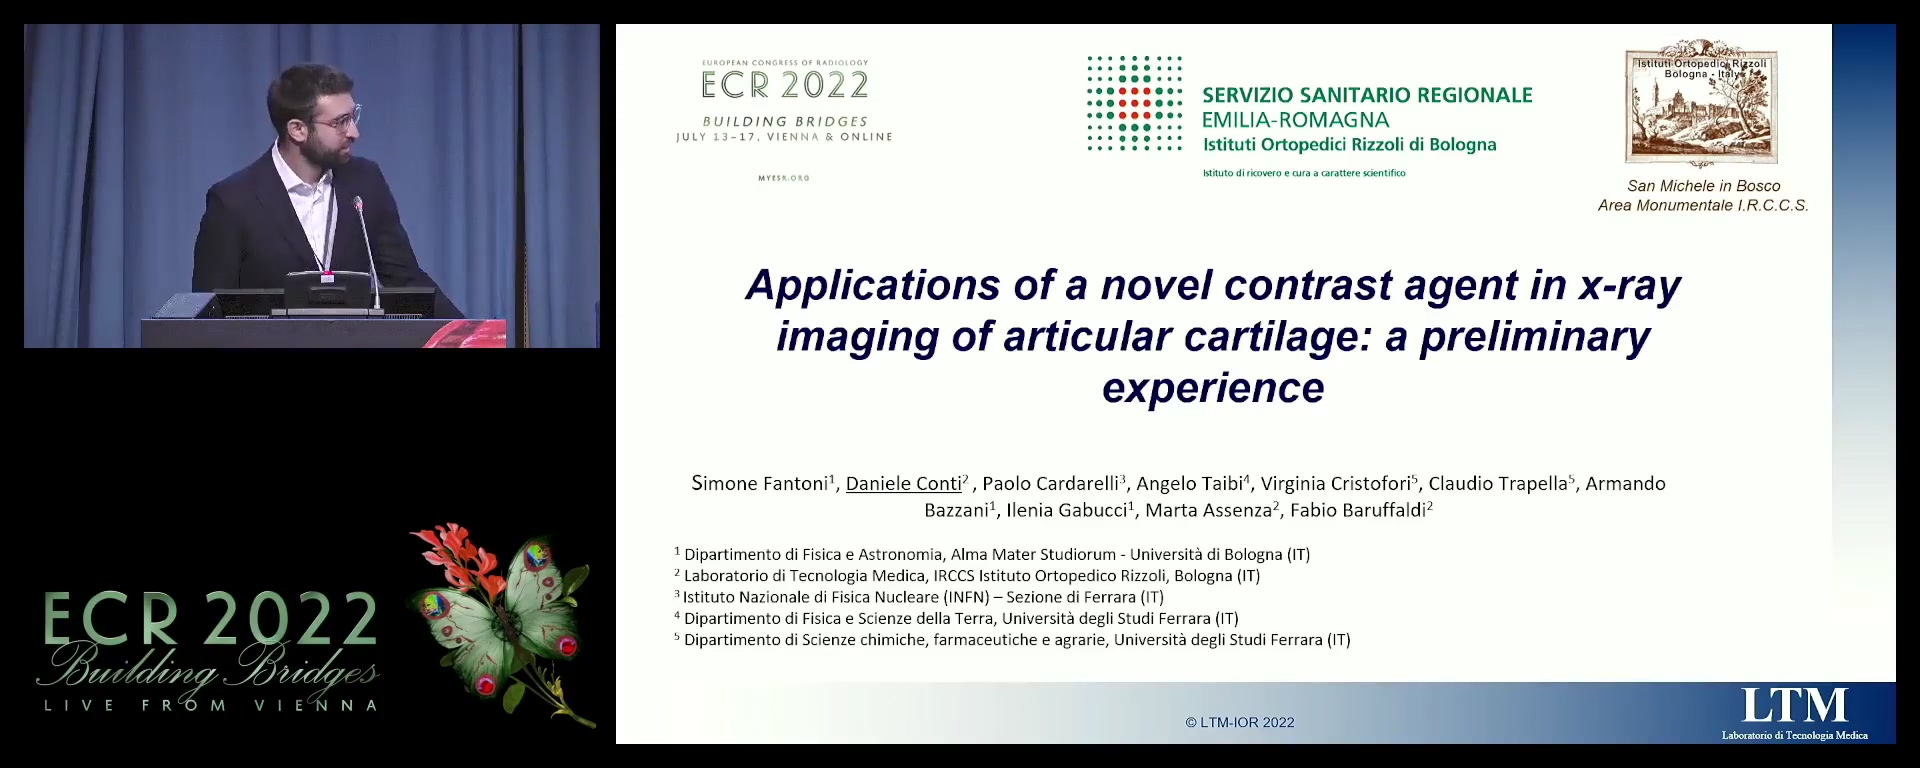 Applications of a novel contrast agent in x-ray imaging of articular cartilage: a preliminary experience - Daniele Conti, Bologna / IT